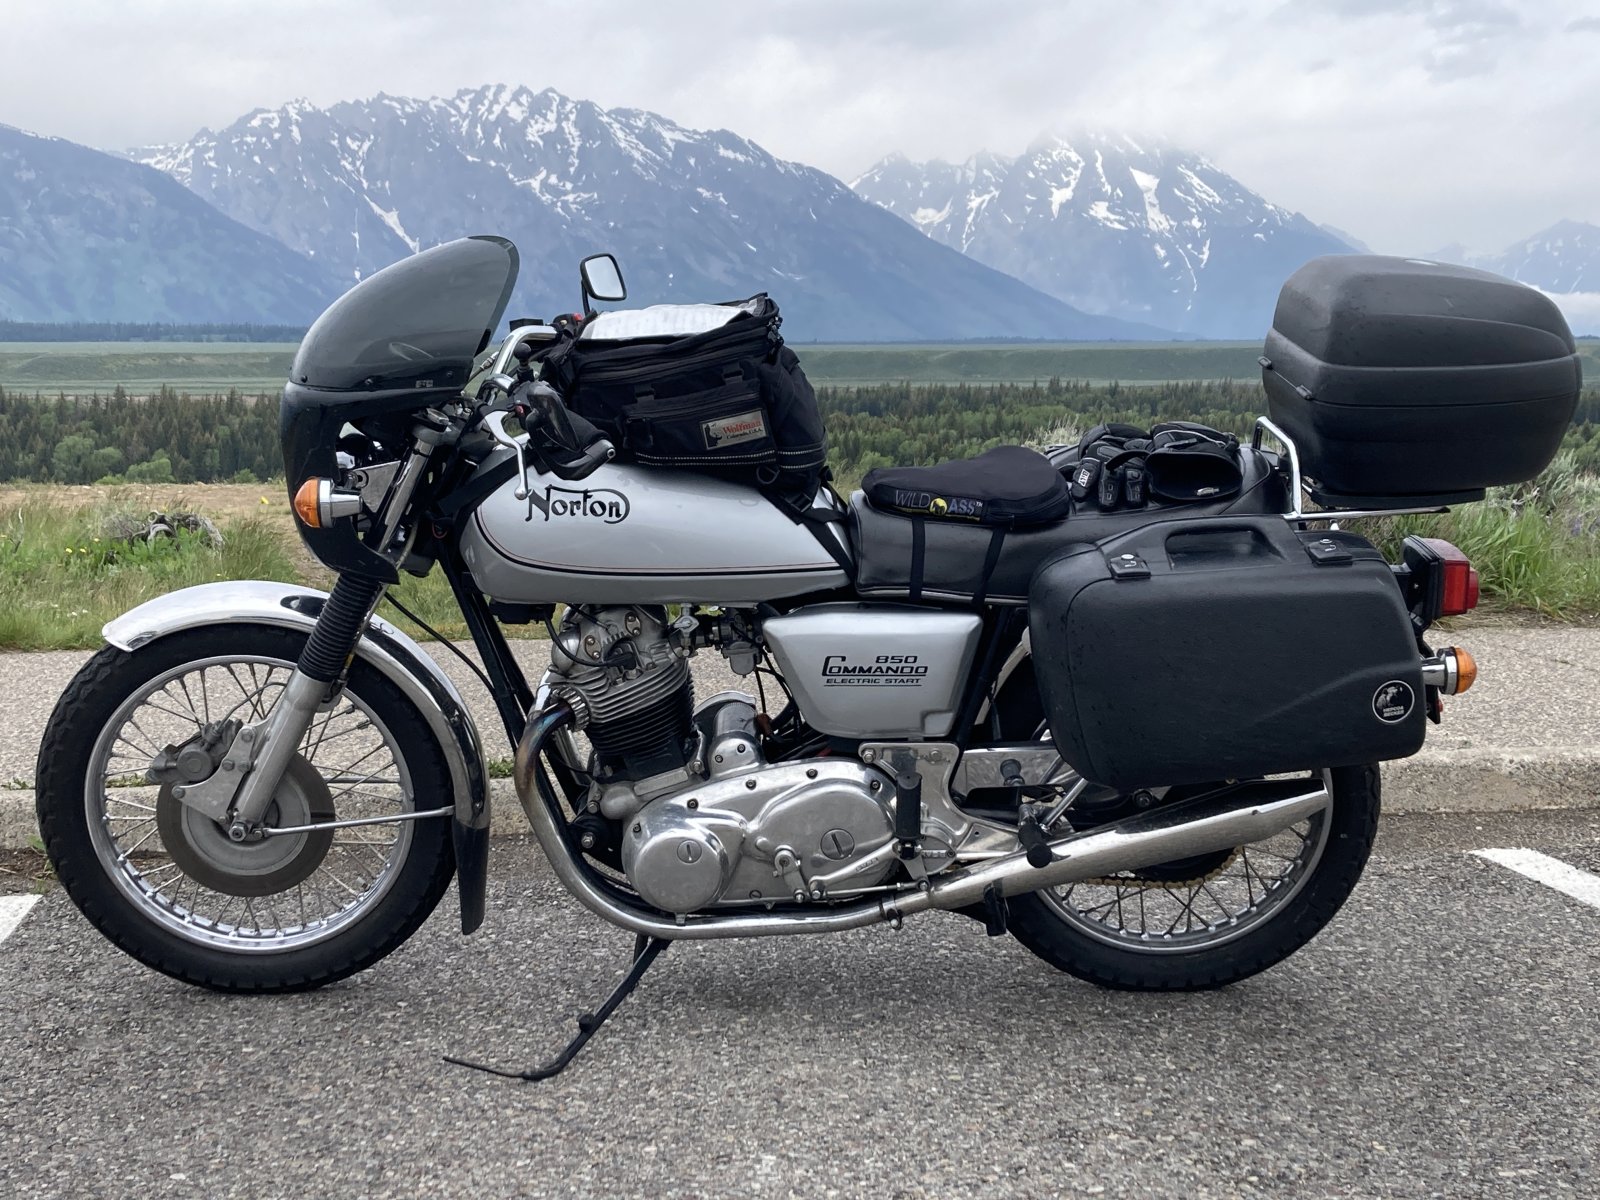 Hepco and Becker Panniers - A question for those using them.